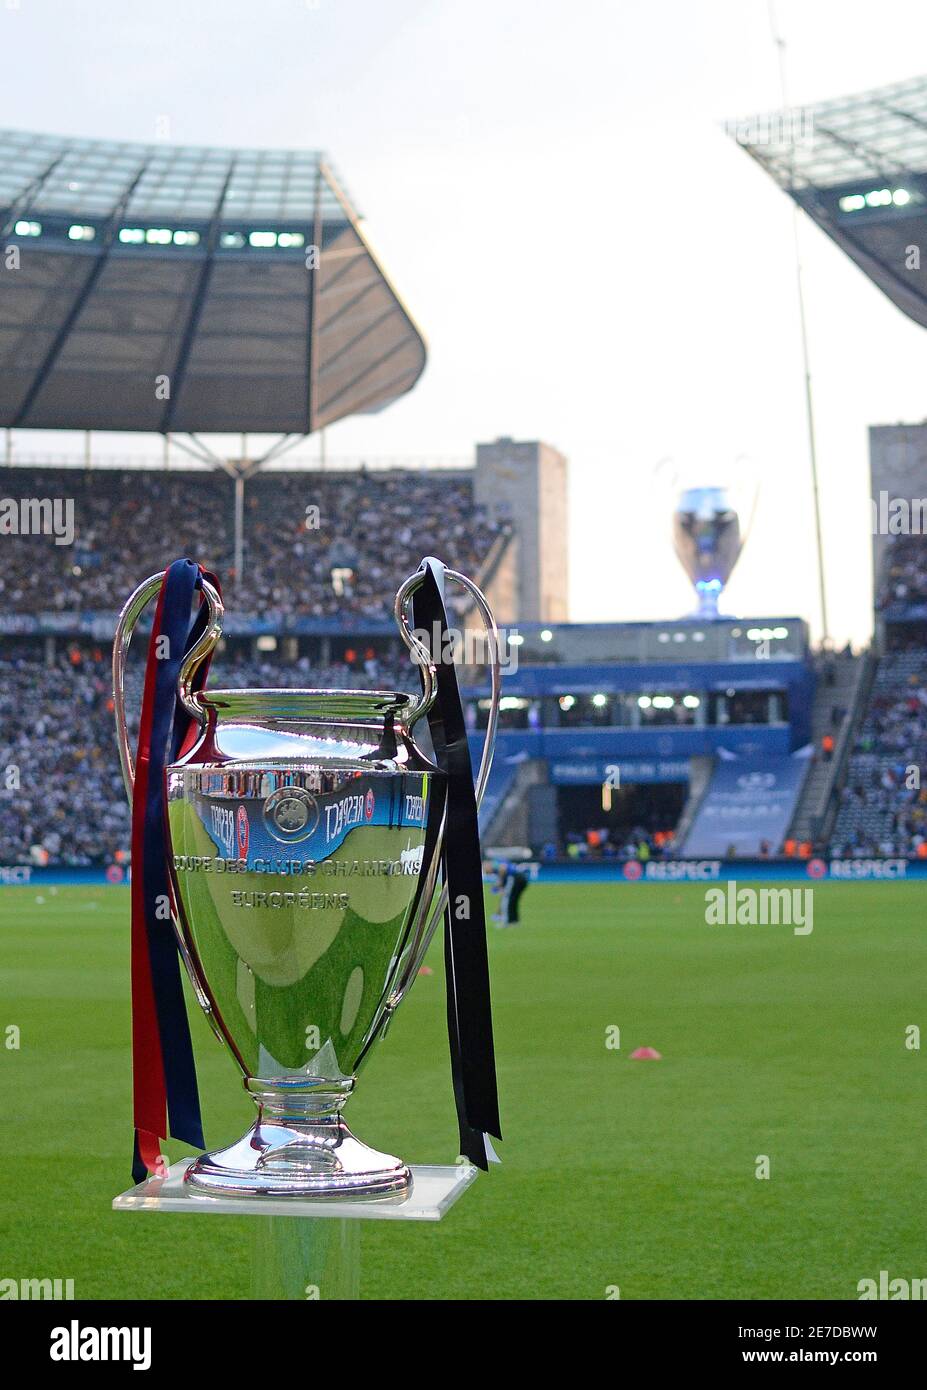 BERLIN, GERMANY - JUNE 6, 2015: UCL trophy pictured during the 2014/15 UEFA Champions  League Final between Juventus Torino and FC Barcelona at Olympiastadion  Stock Photo - Alamy